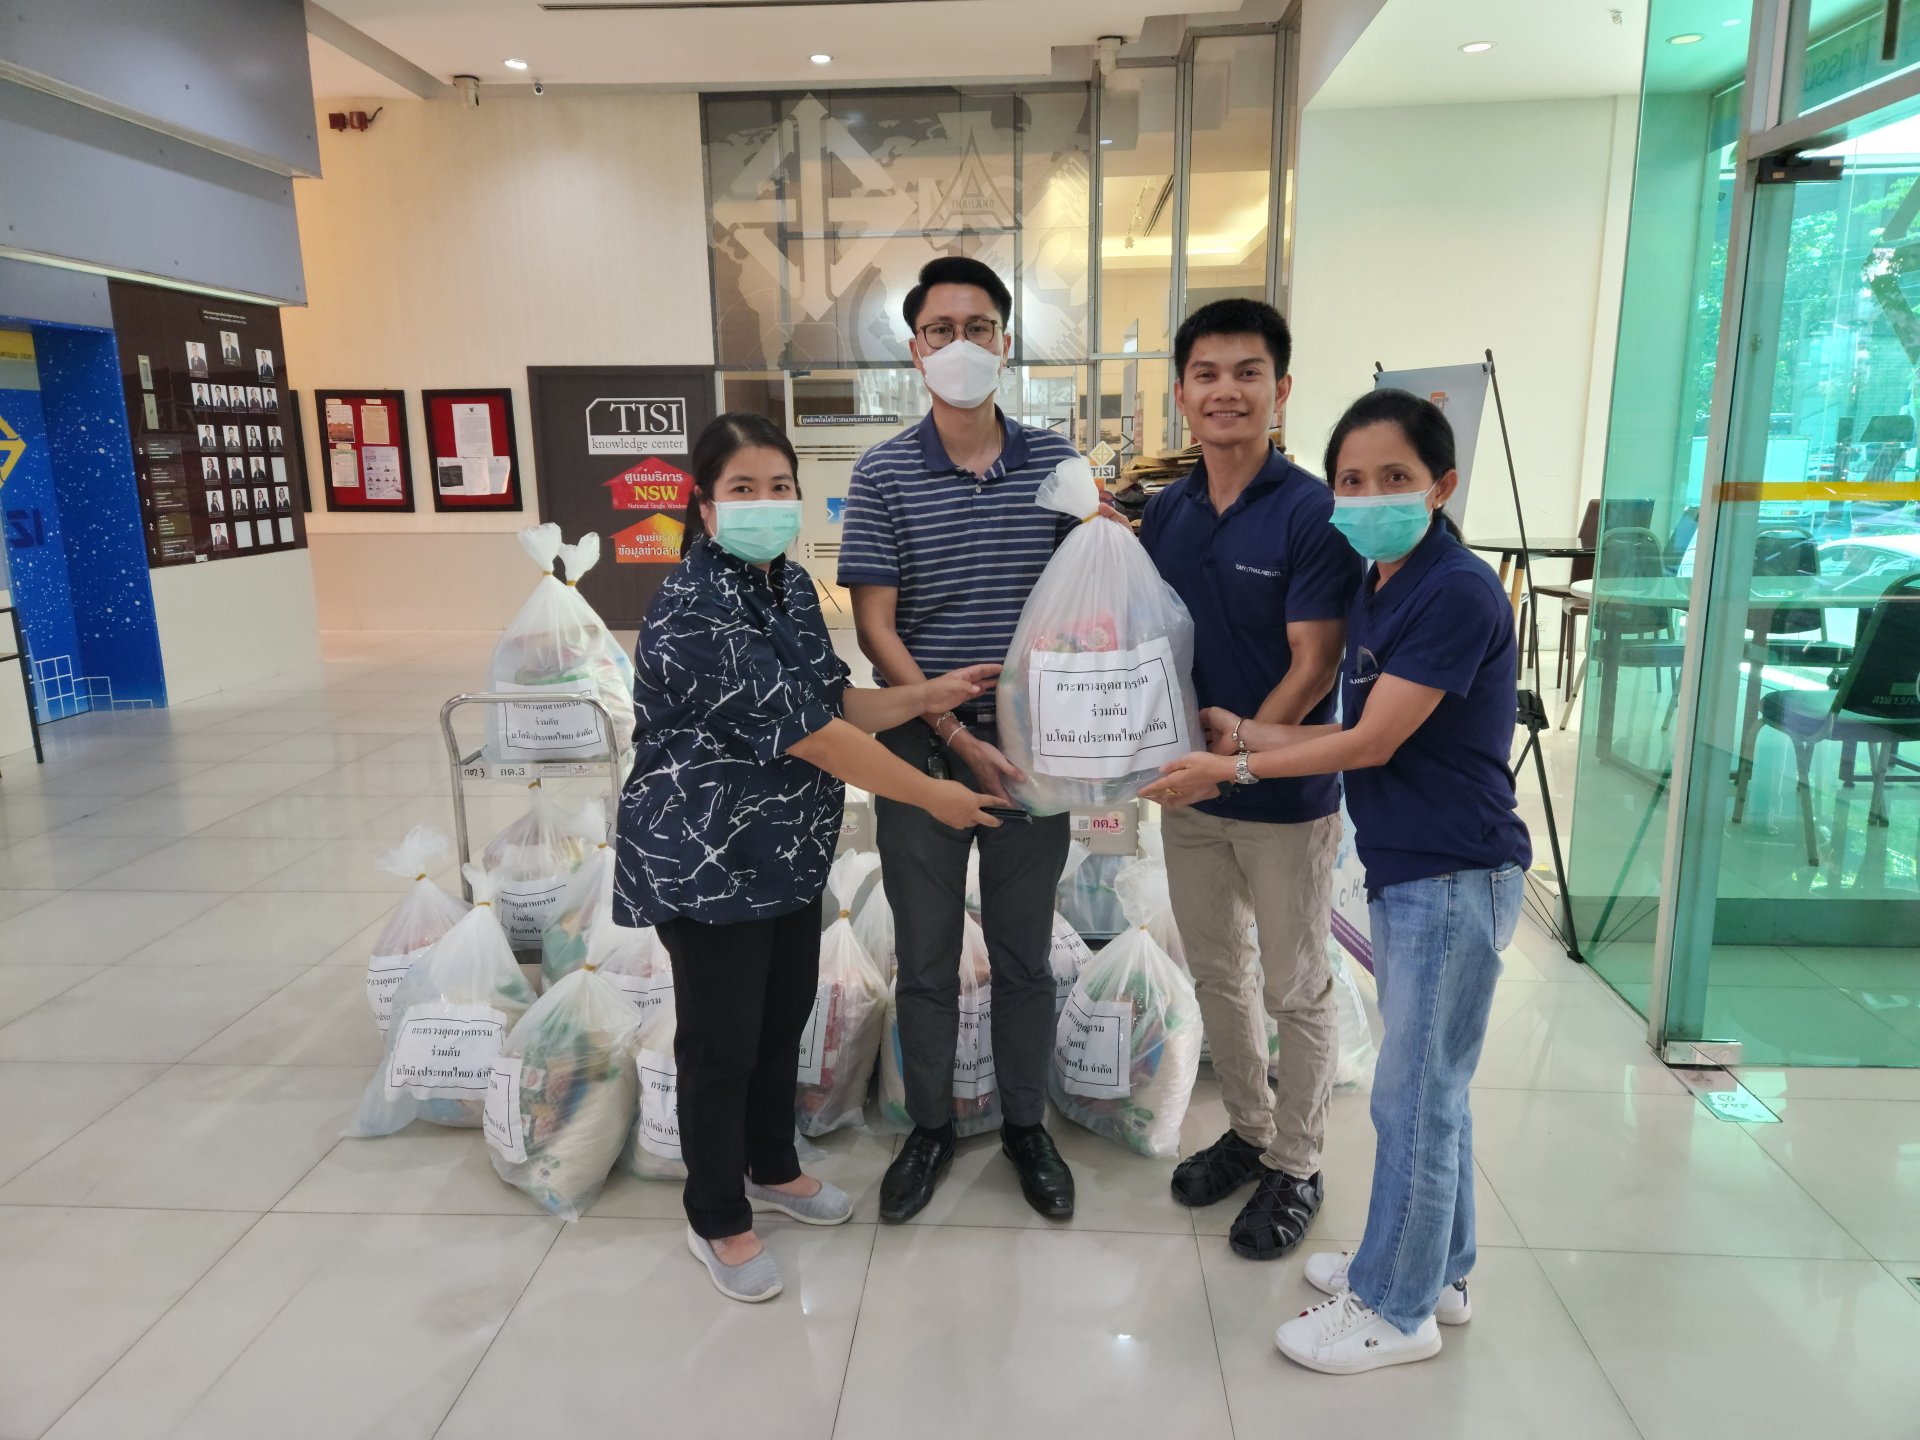 Survival bags donation for flood victims